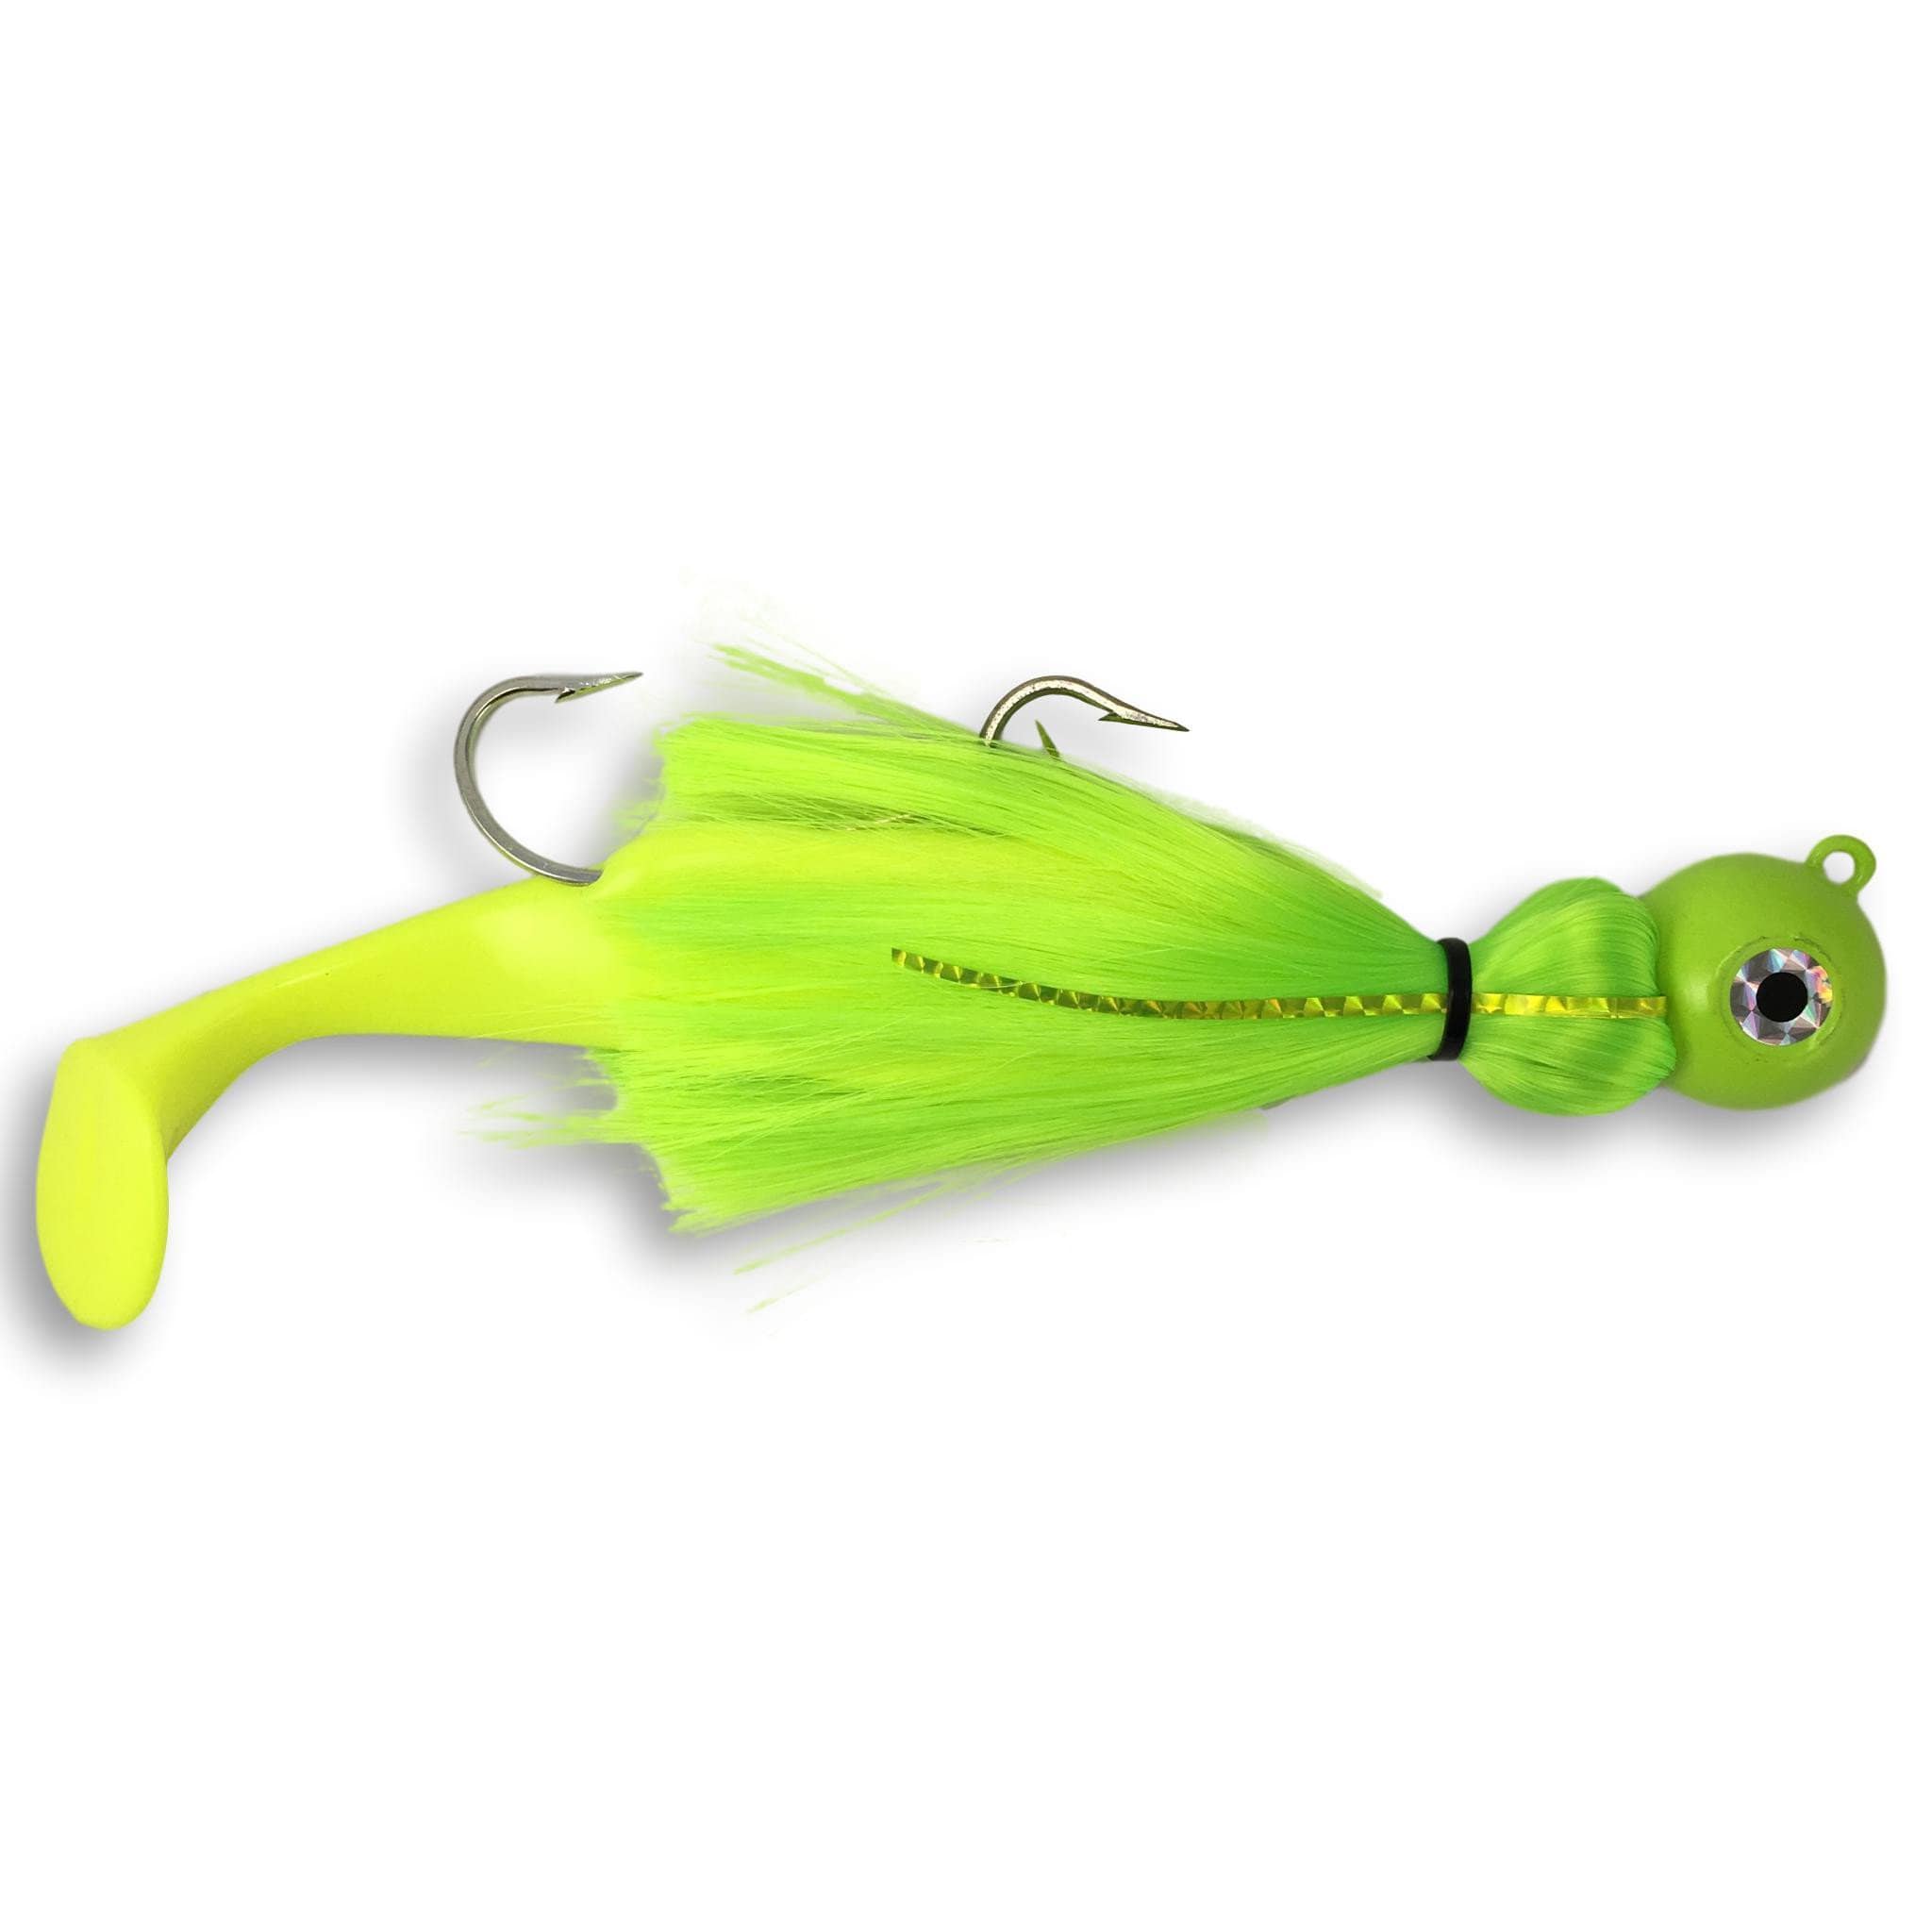 MagicTail Mojo Trolling Lures - The Saltwater Edge